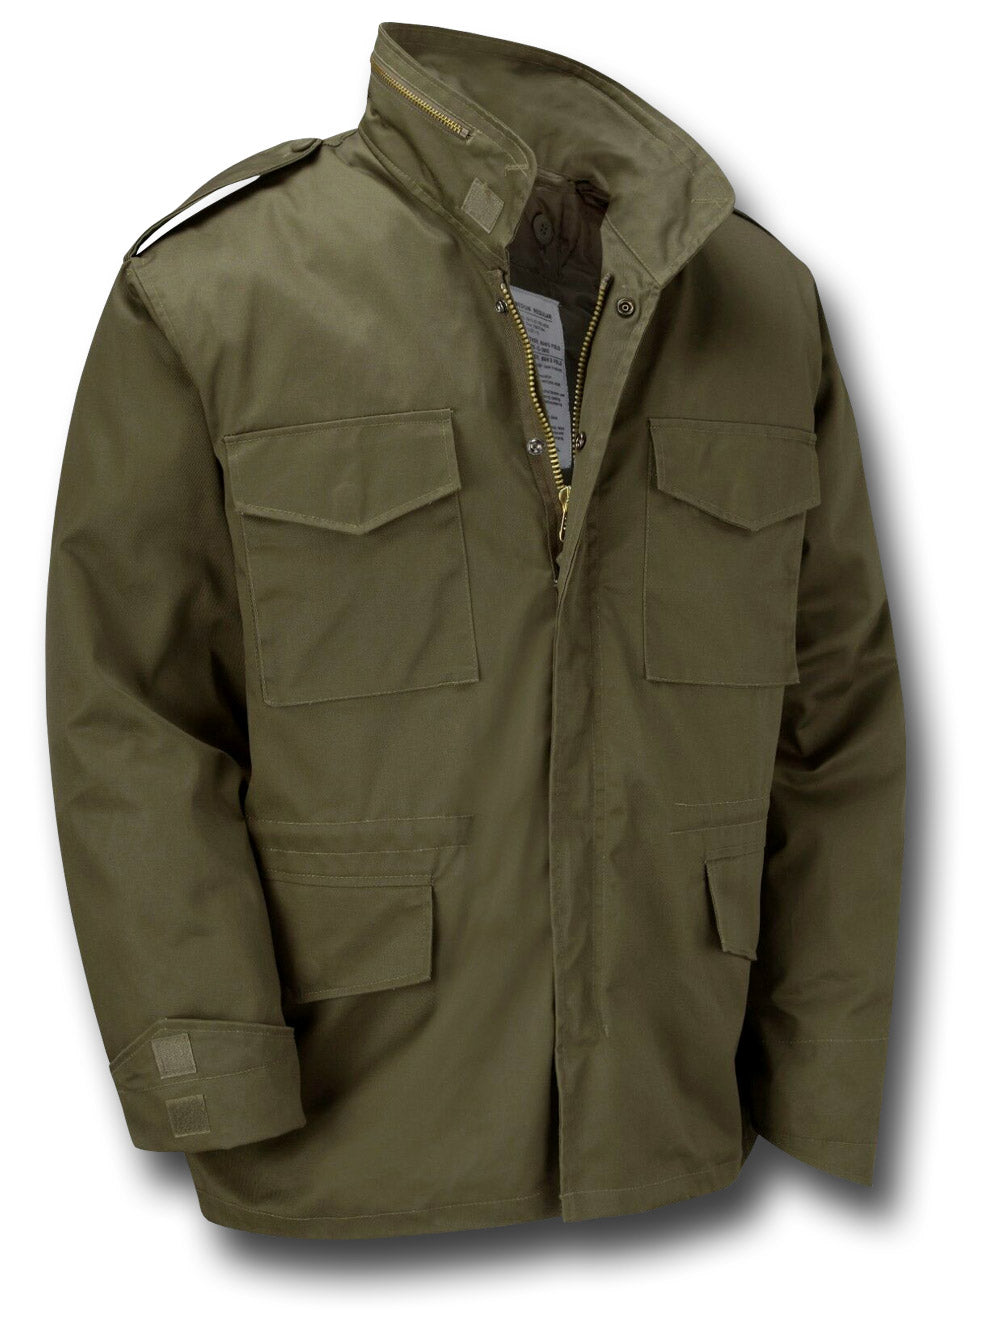 M65 STYLE JACKET WITH LINER